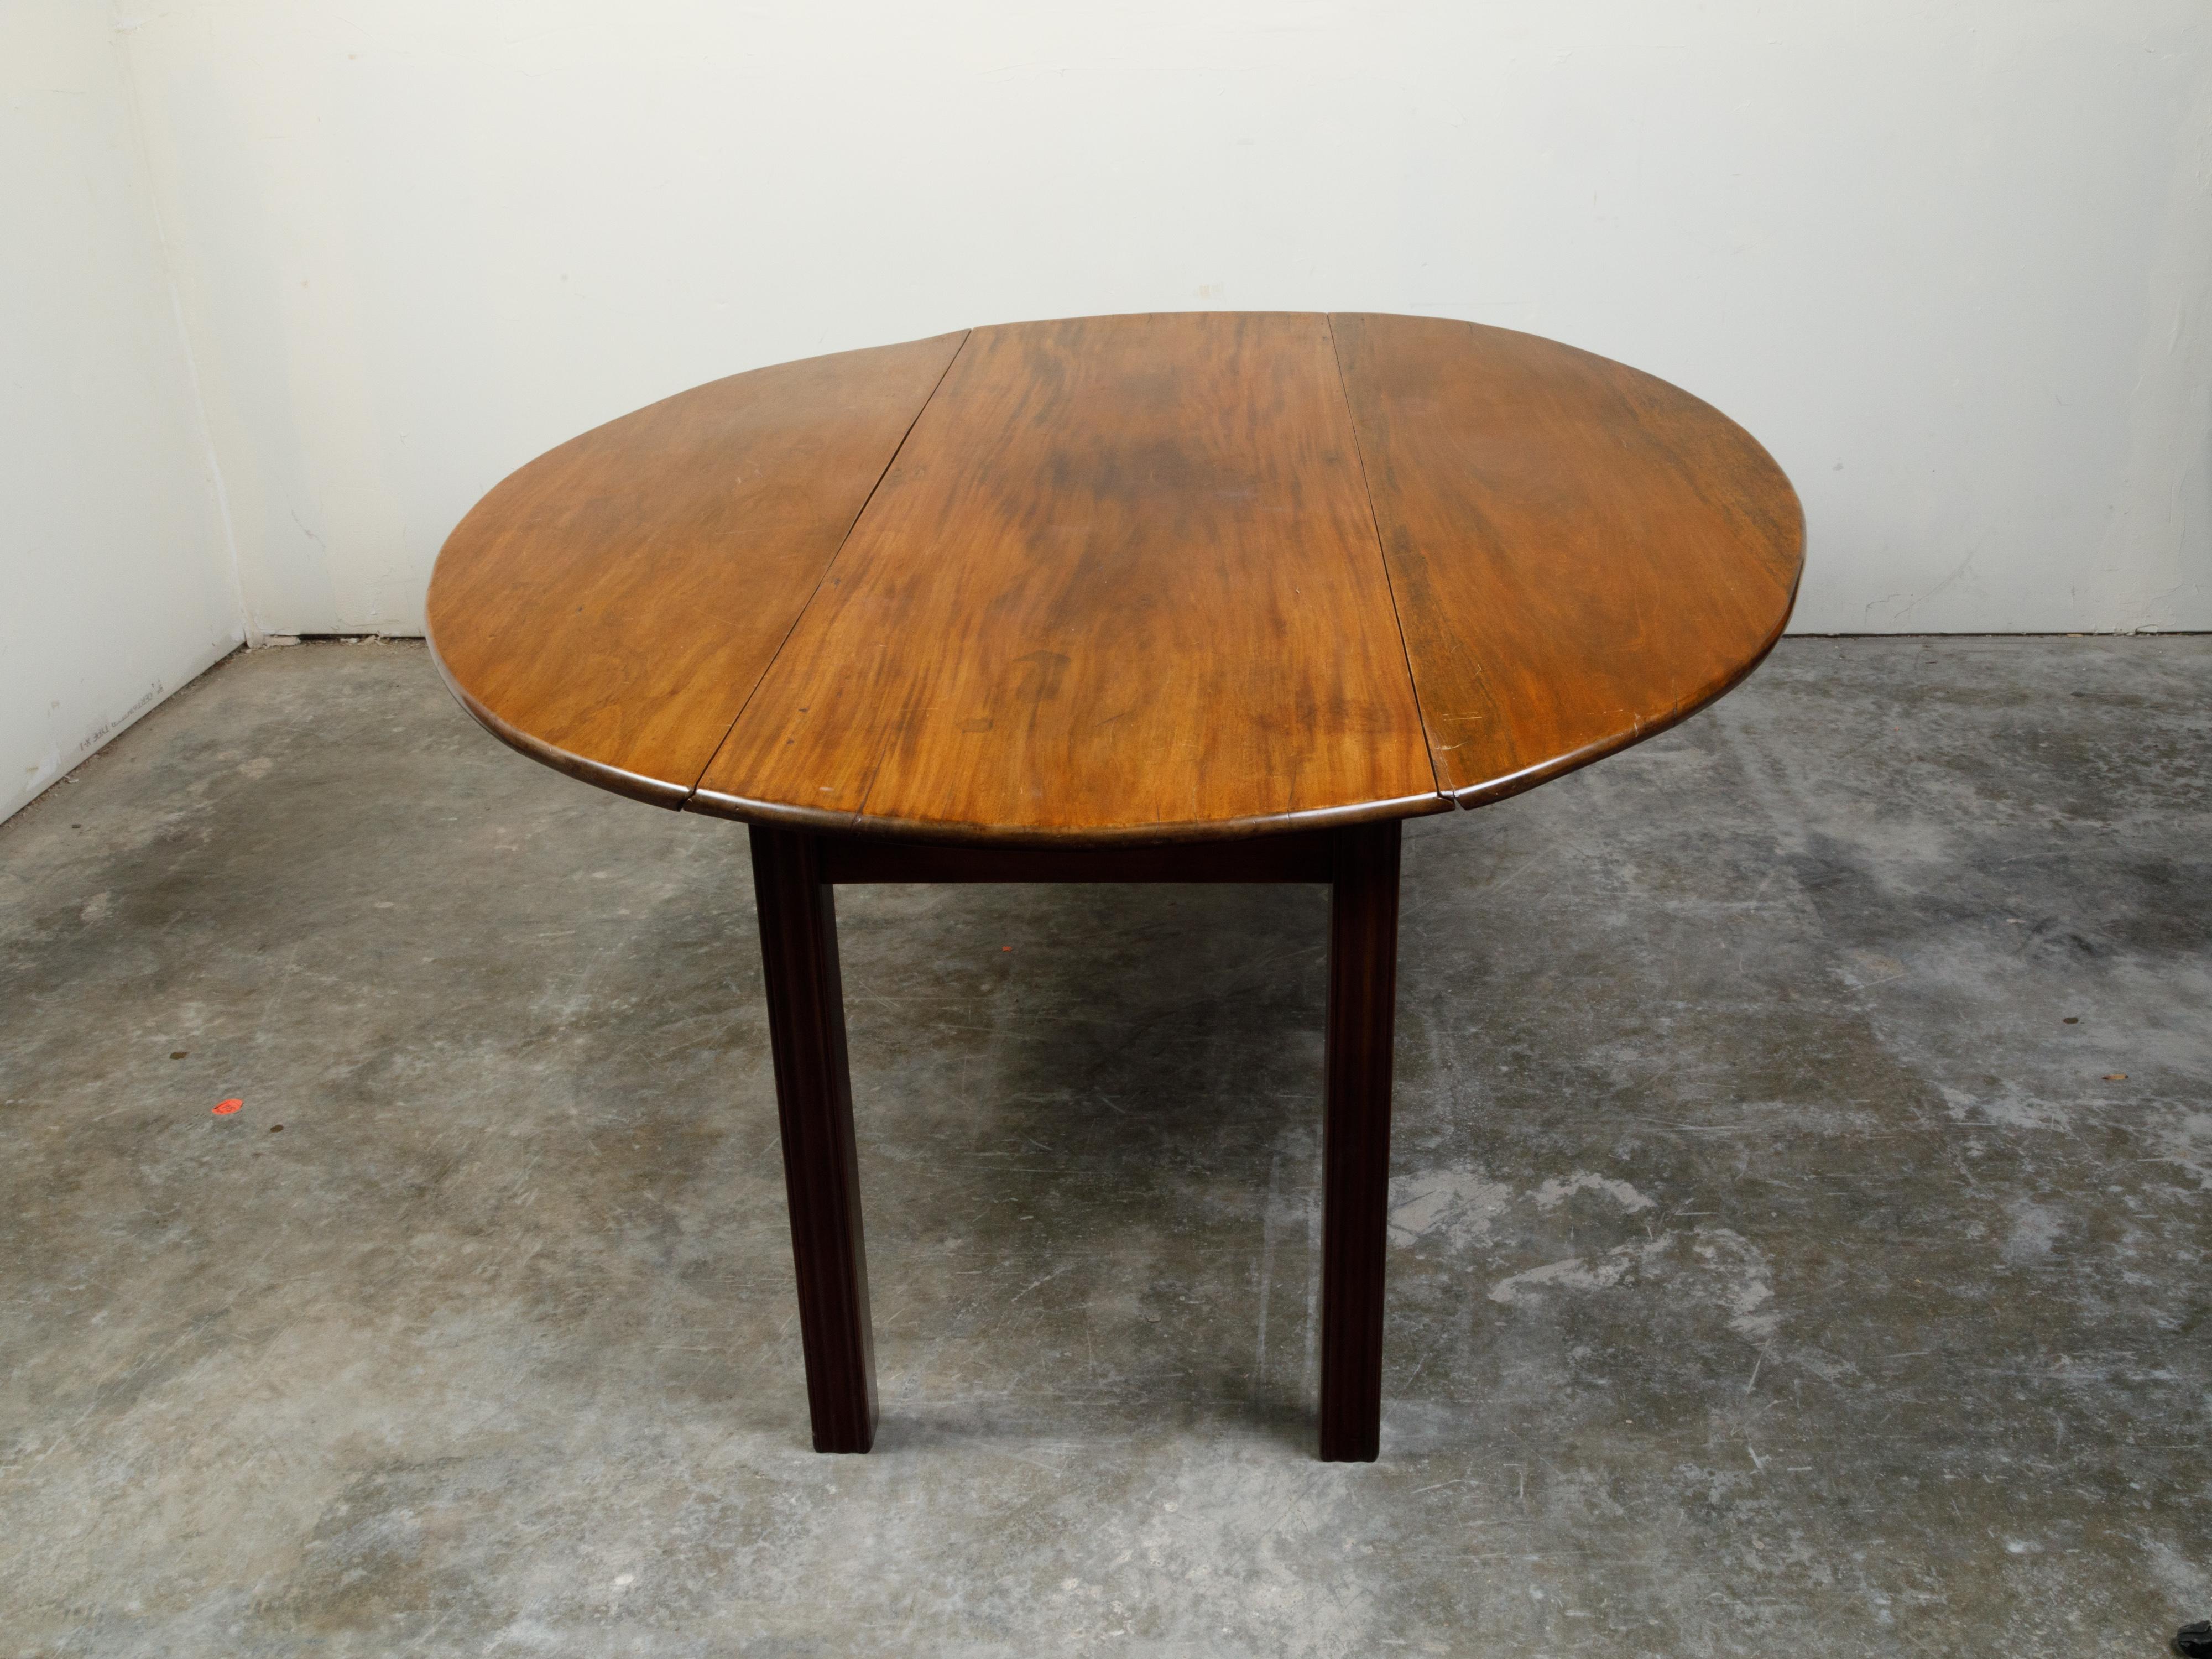 19th Century English Walnut Drop-Leaf Table with Oval Top and Straight Legs For Sale 1